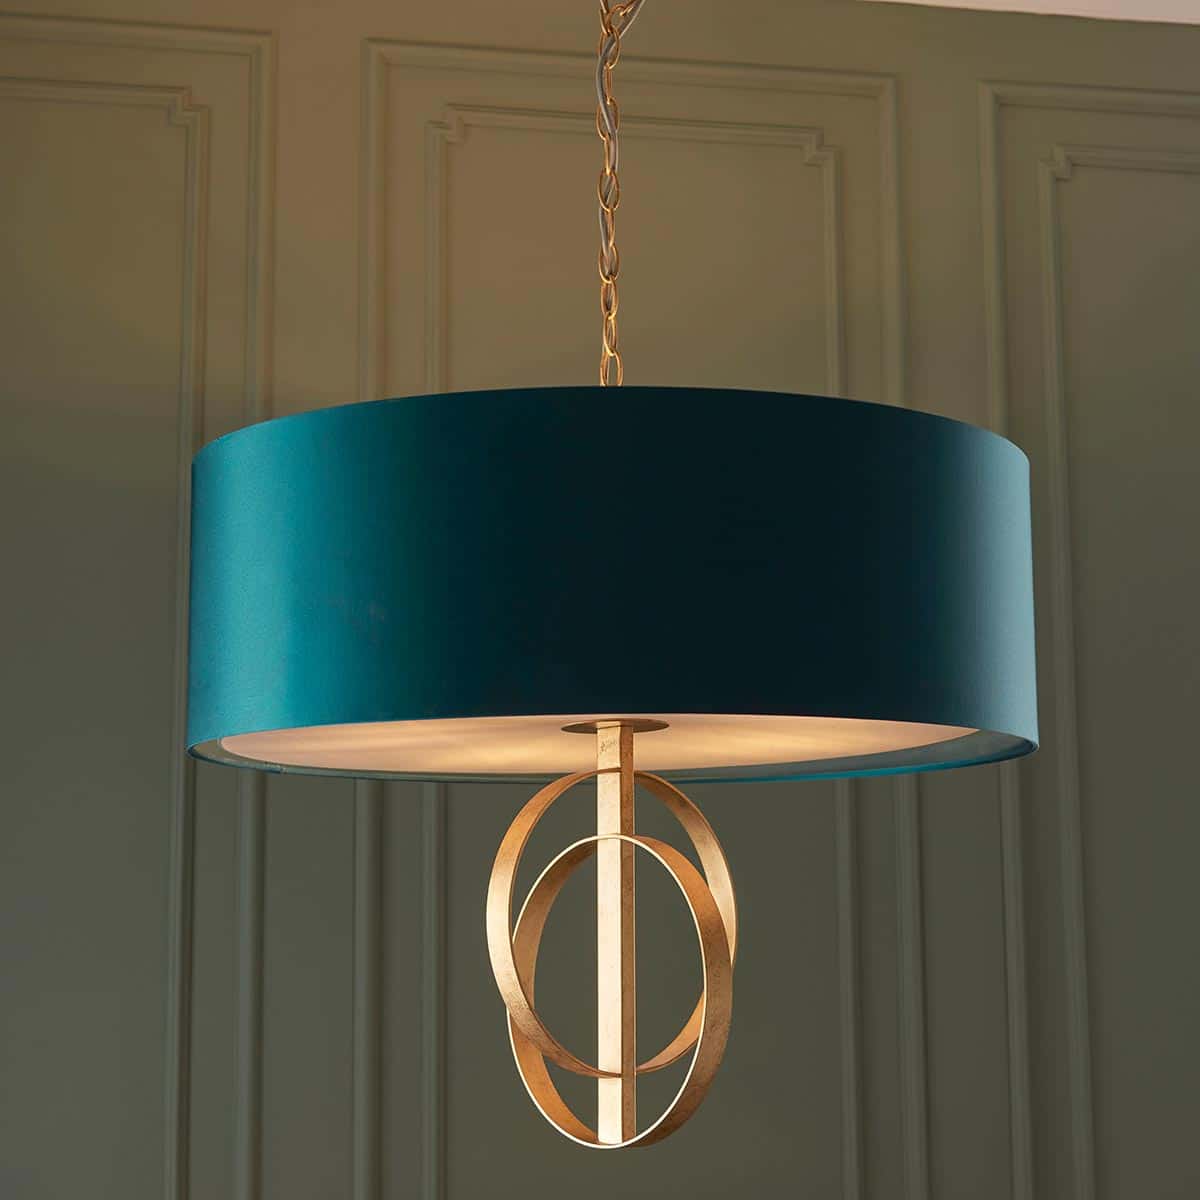 Stylish Double Hoop 5 Light Ceiling Pendant Gold Leaf 70cm Teal Shade